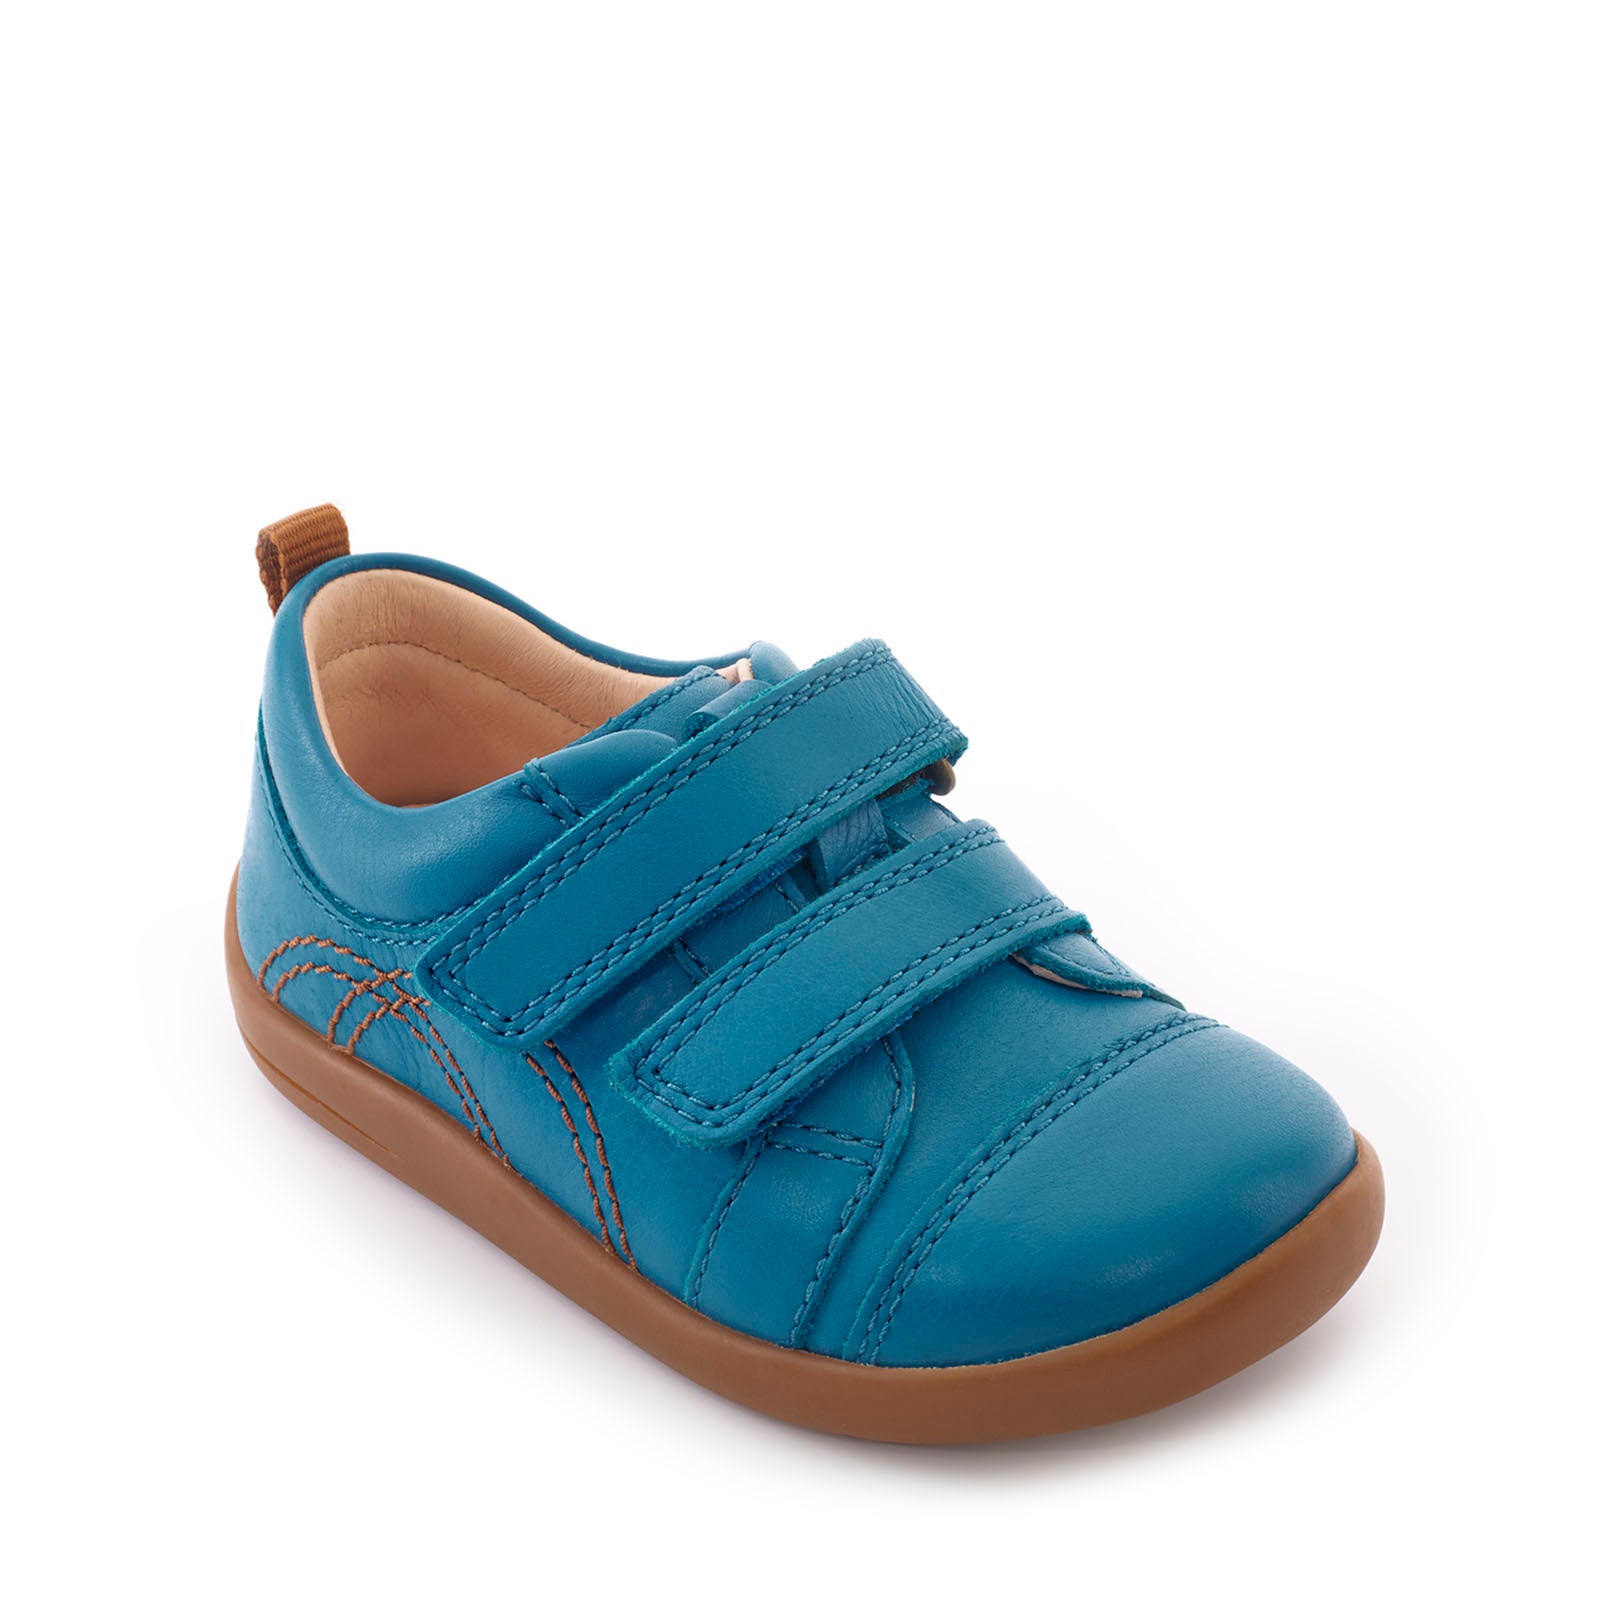 Start-Rite Tree House 0781_12 Boys Bright Blue Leather Touch Fastening First Shoes